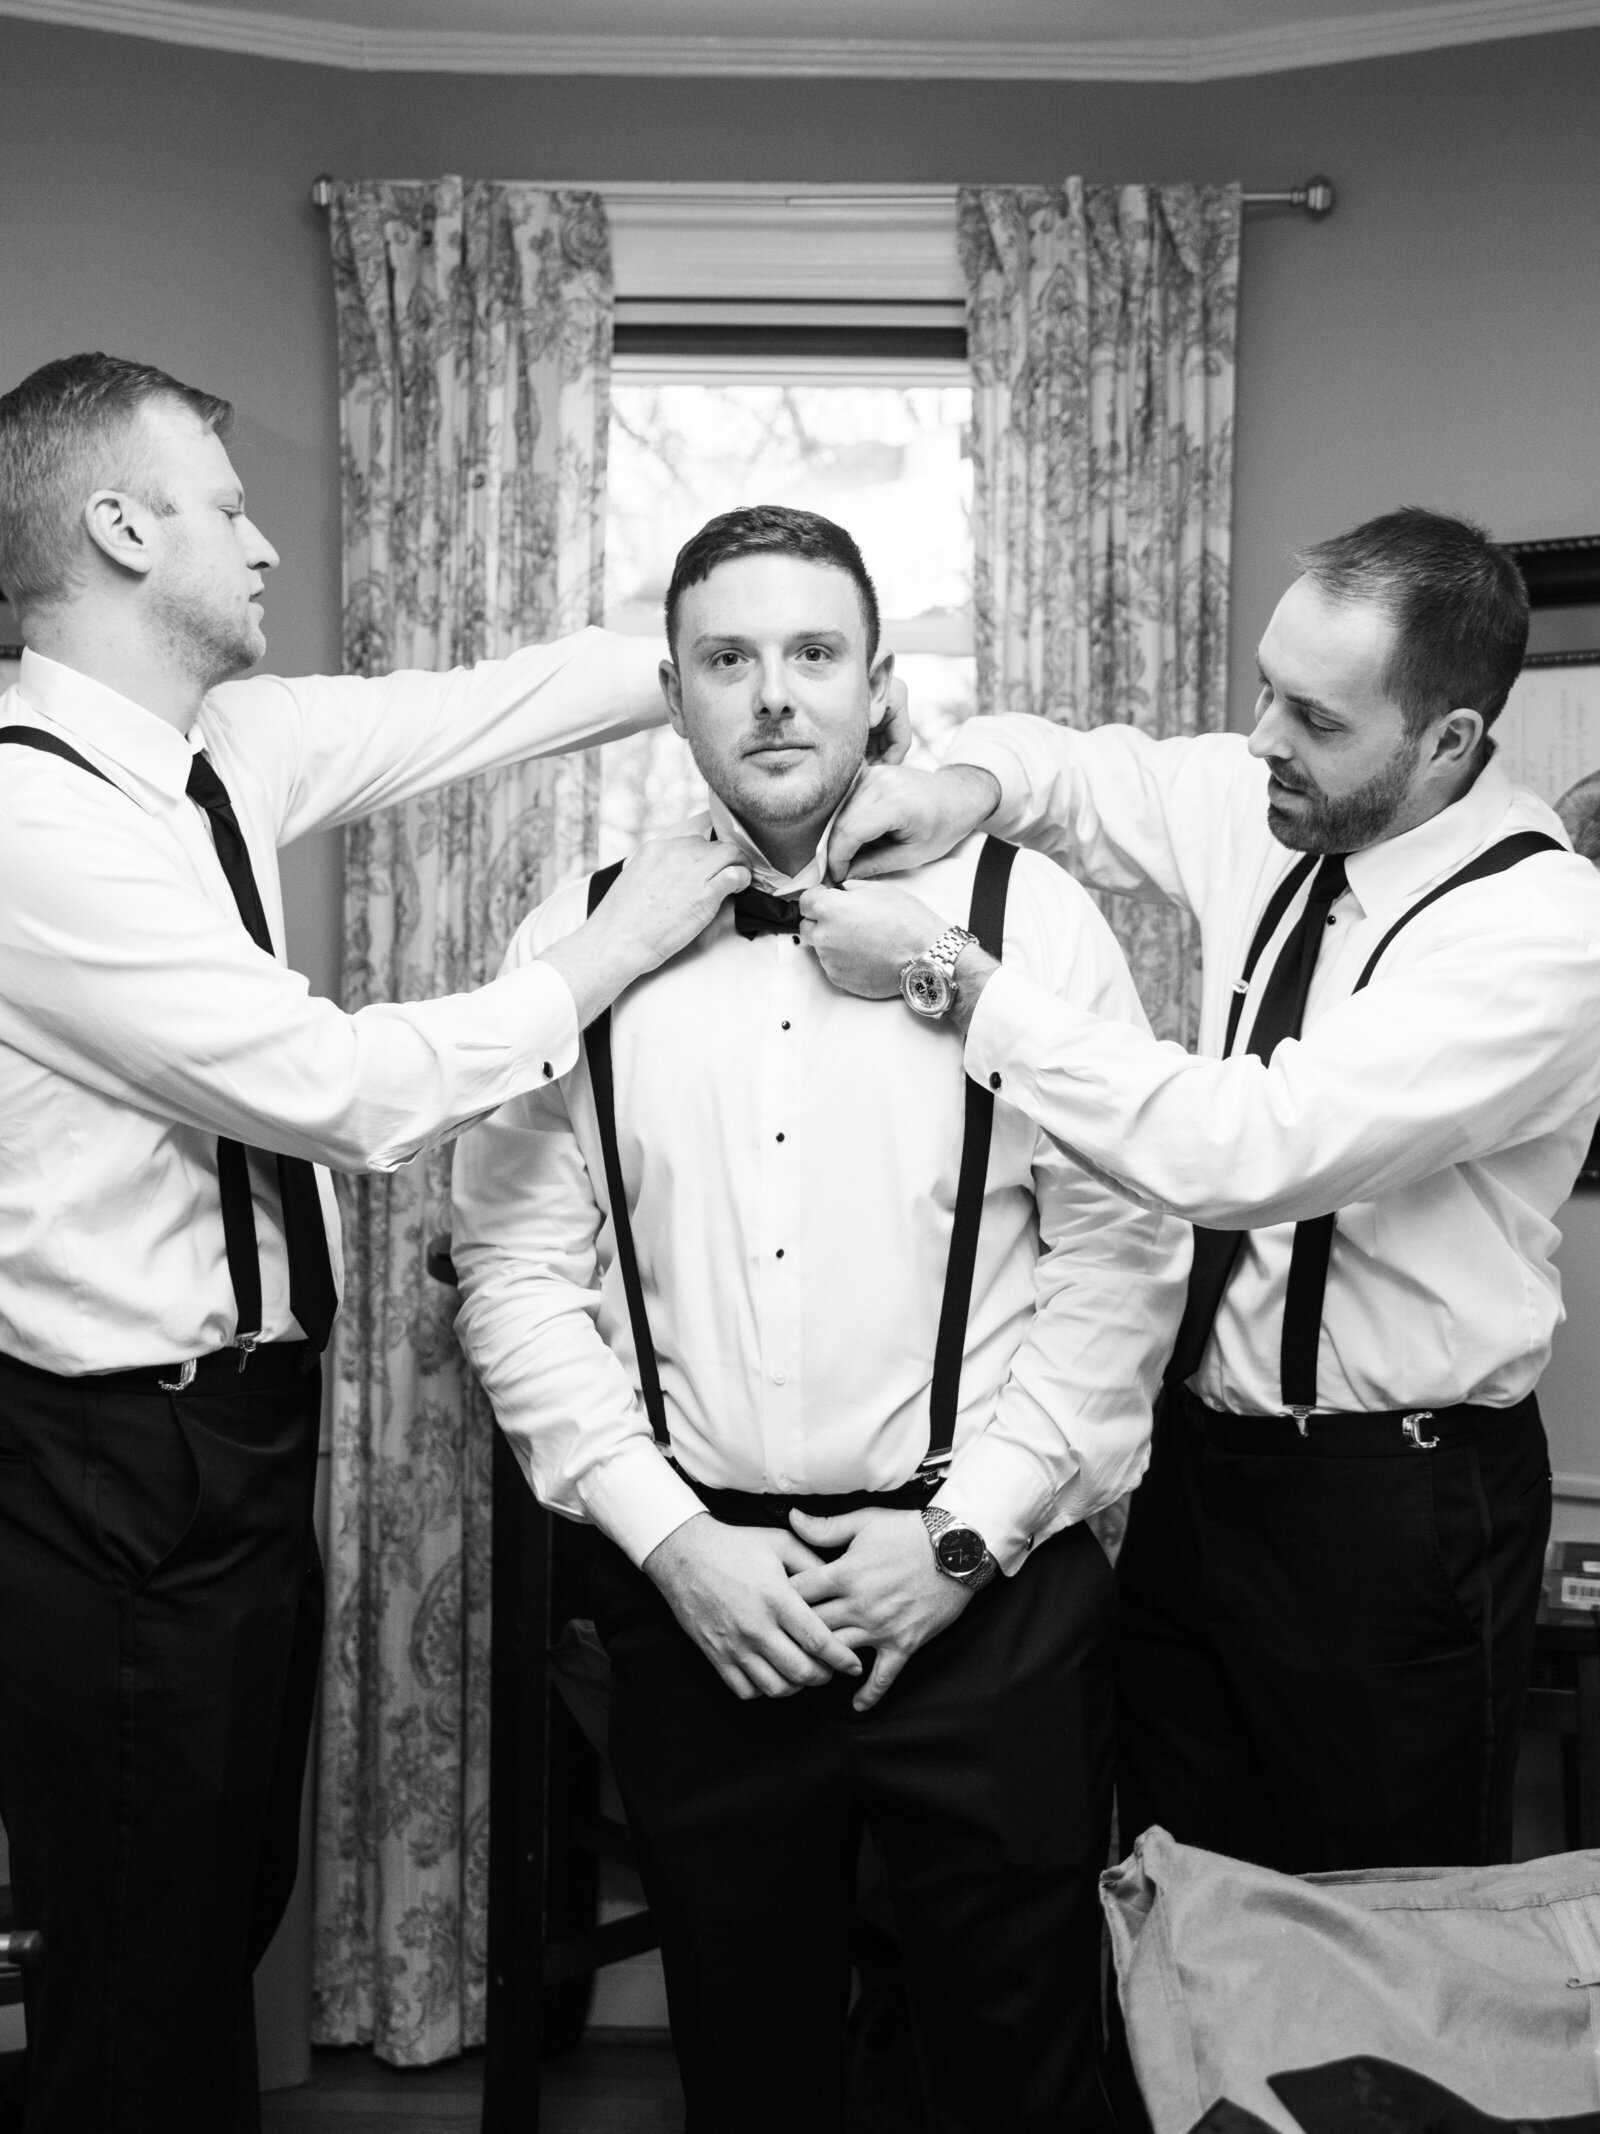 Overhills Mansion groom getting ready on wedding day